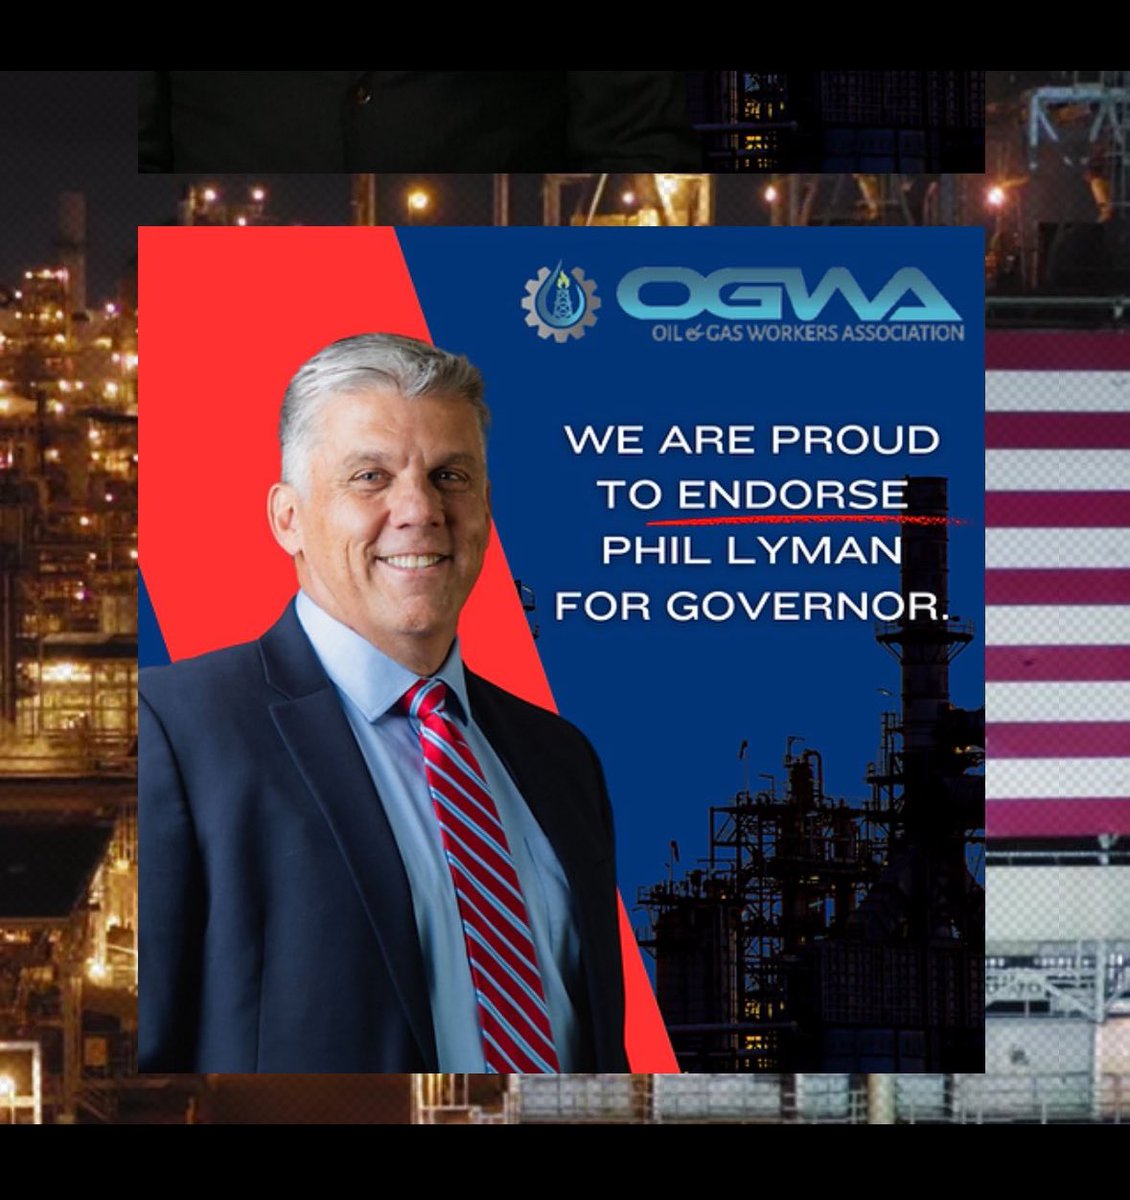 Such an honor to have the endorsement of @ogwausa! Thank you! #utpol #Lymanforgovernor